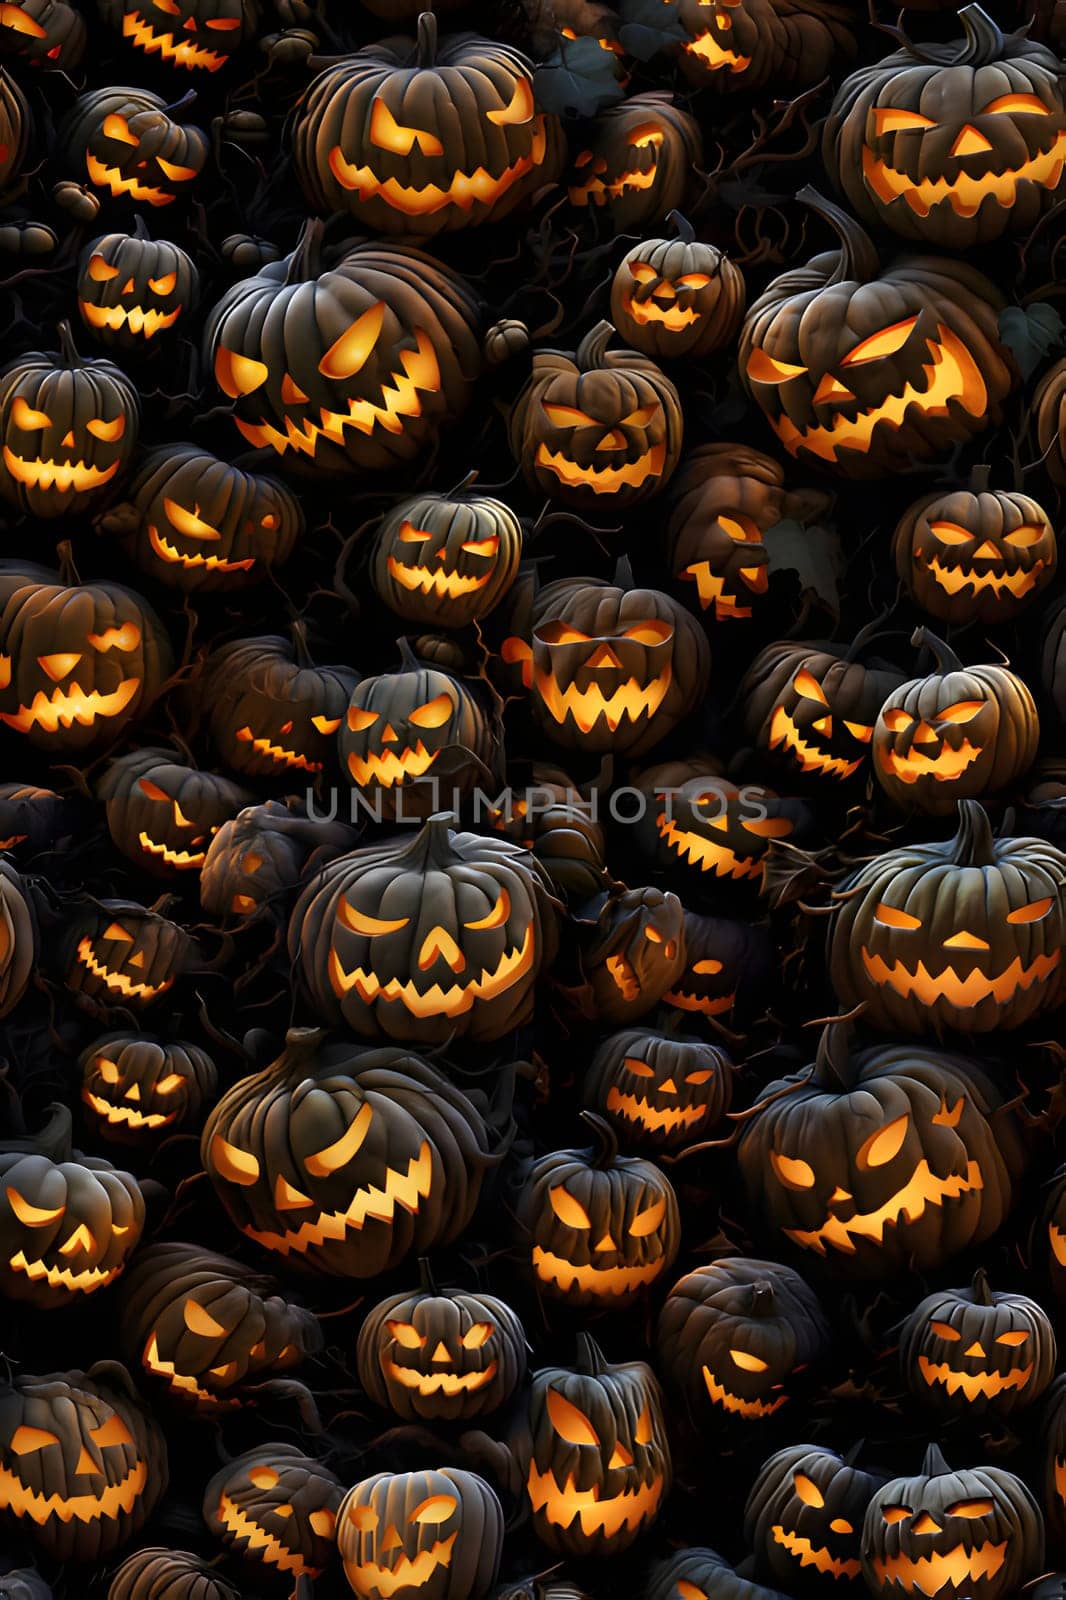 Elegant and modern. Luminously eyes jack-o-lantern pumpkins as abstract background, wallpaper, banner, texture design with pattern - vector. Black colors.